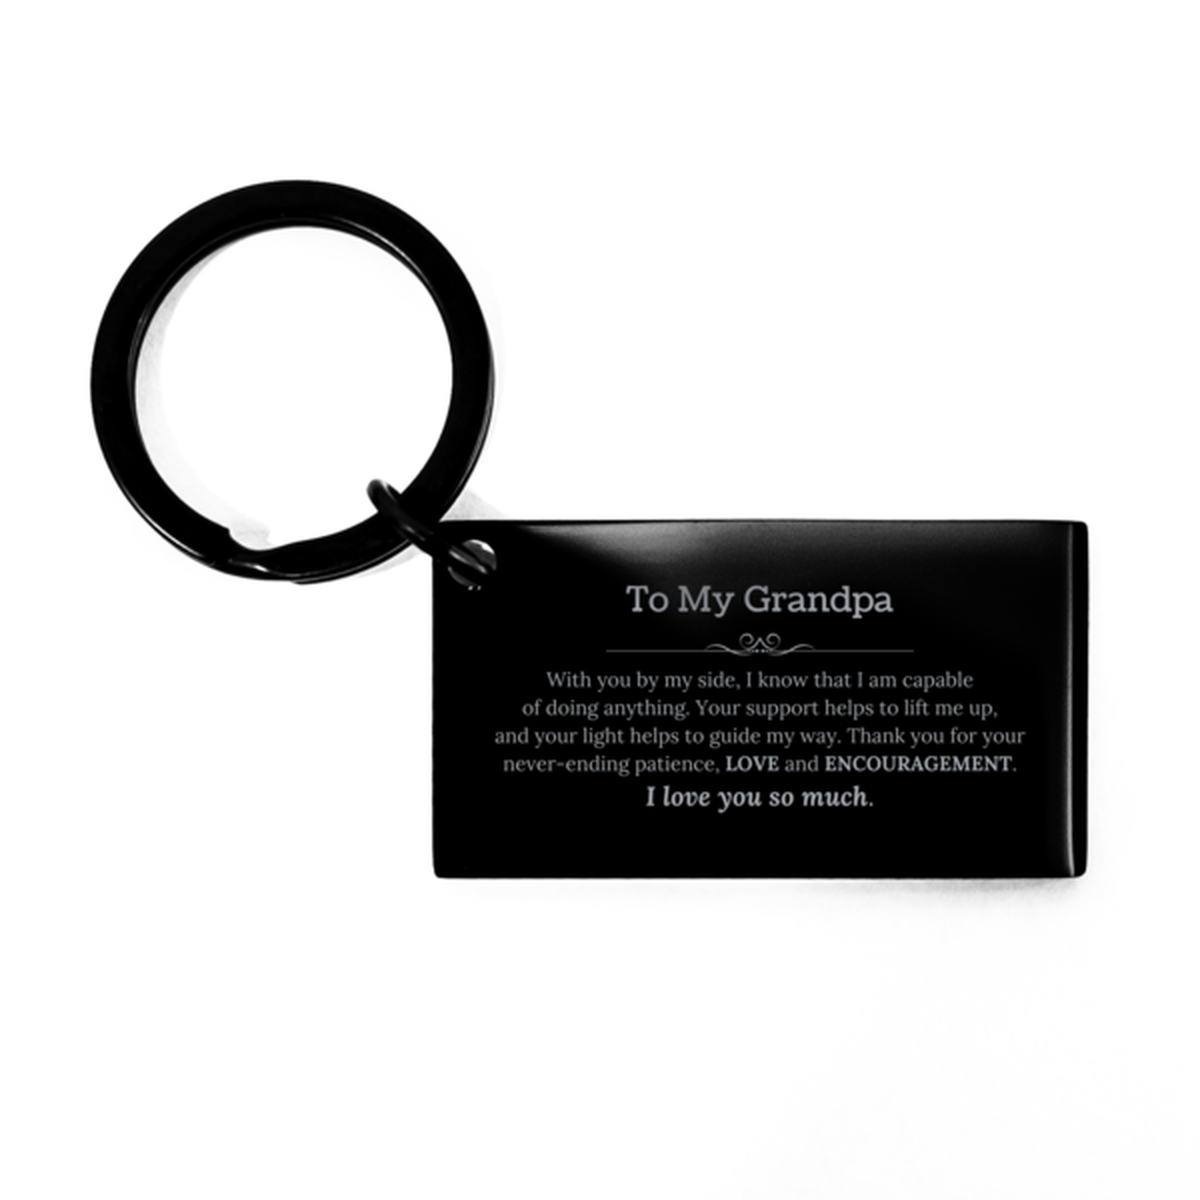 Appreciation Grandpa Keychain Gifts, To My Grandpa Birthday Christmas Wedding Keepsake Gifts for Grandpa With you by my side, I know that I am capable of doing anything. I love you so much